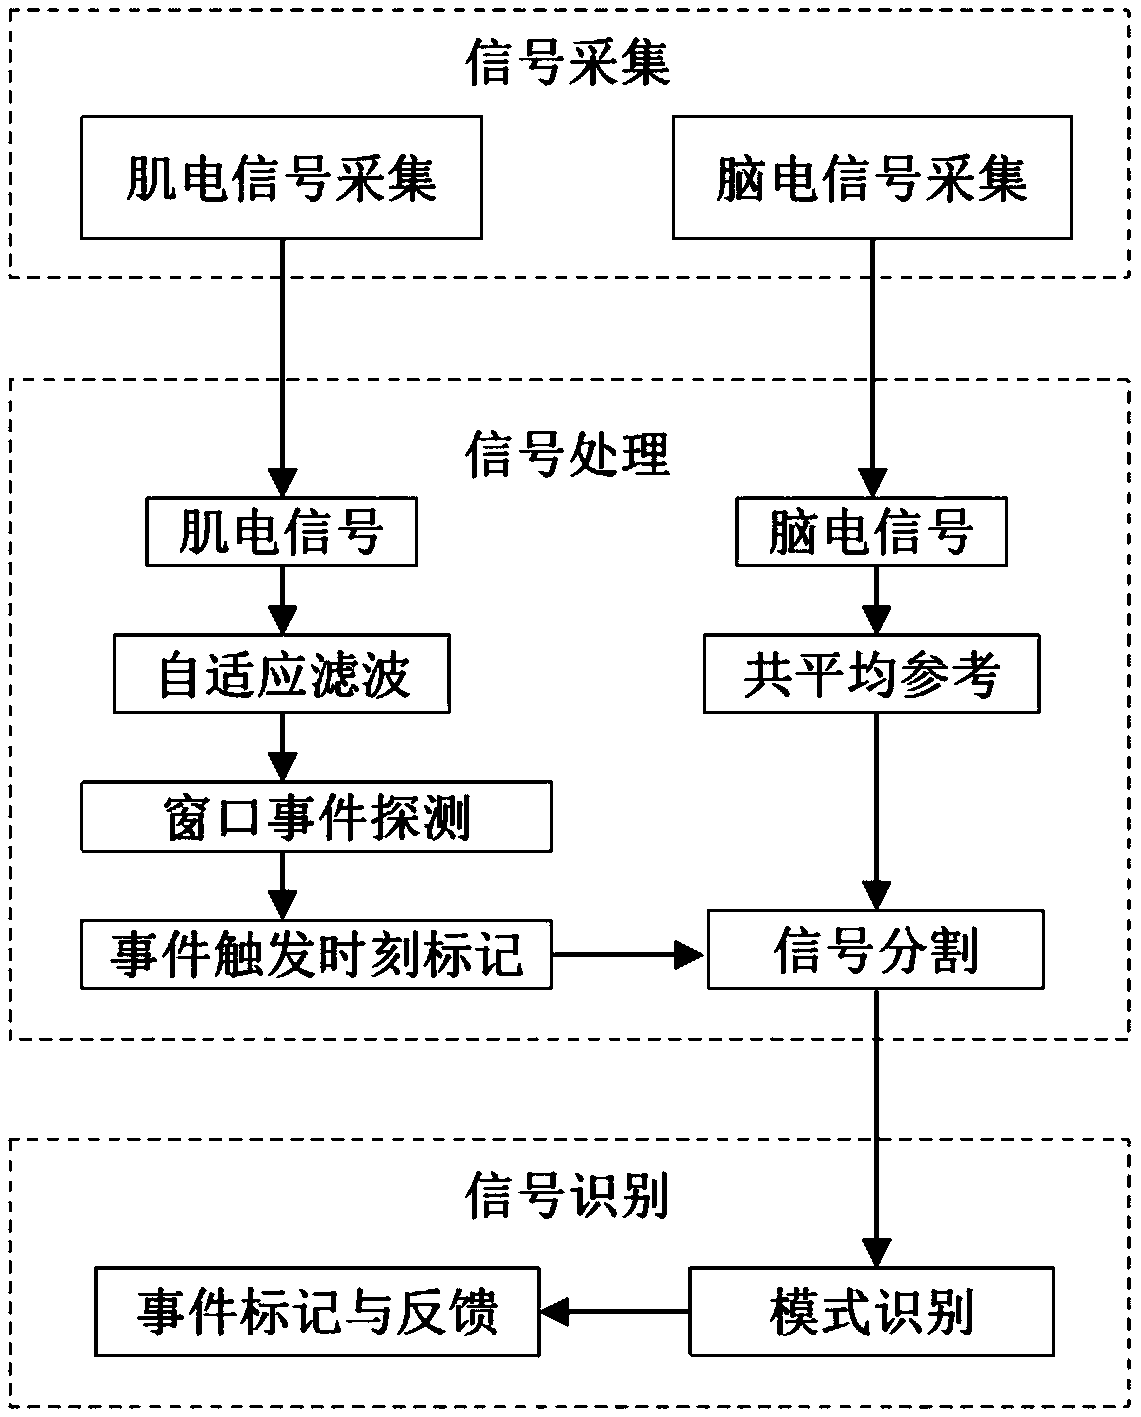 Muscle movement event recognition system and method